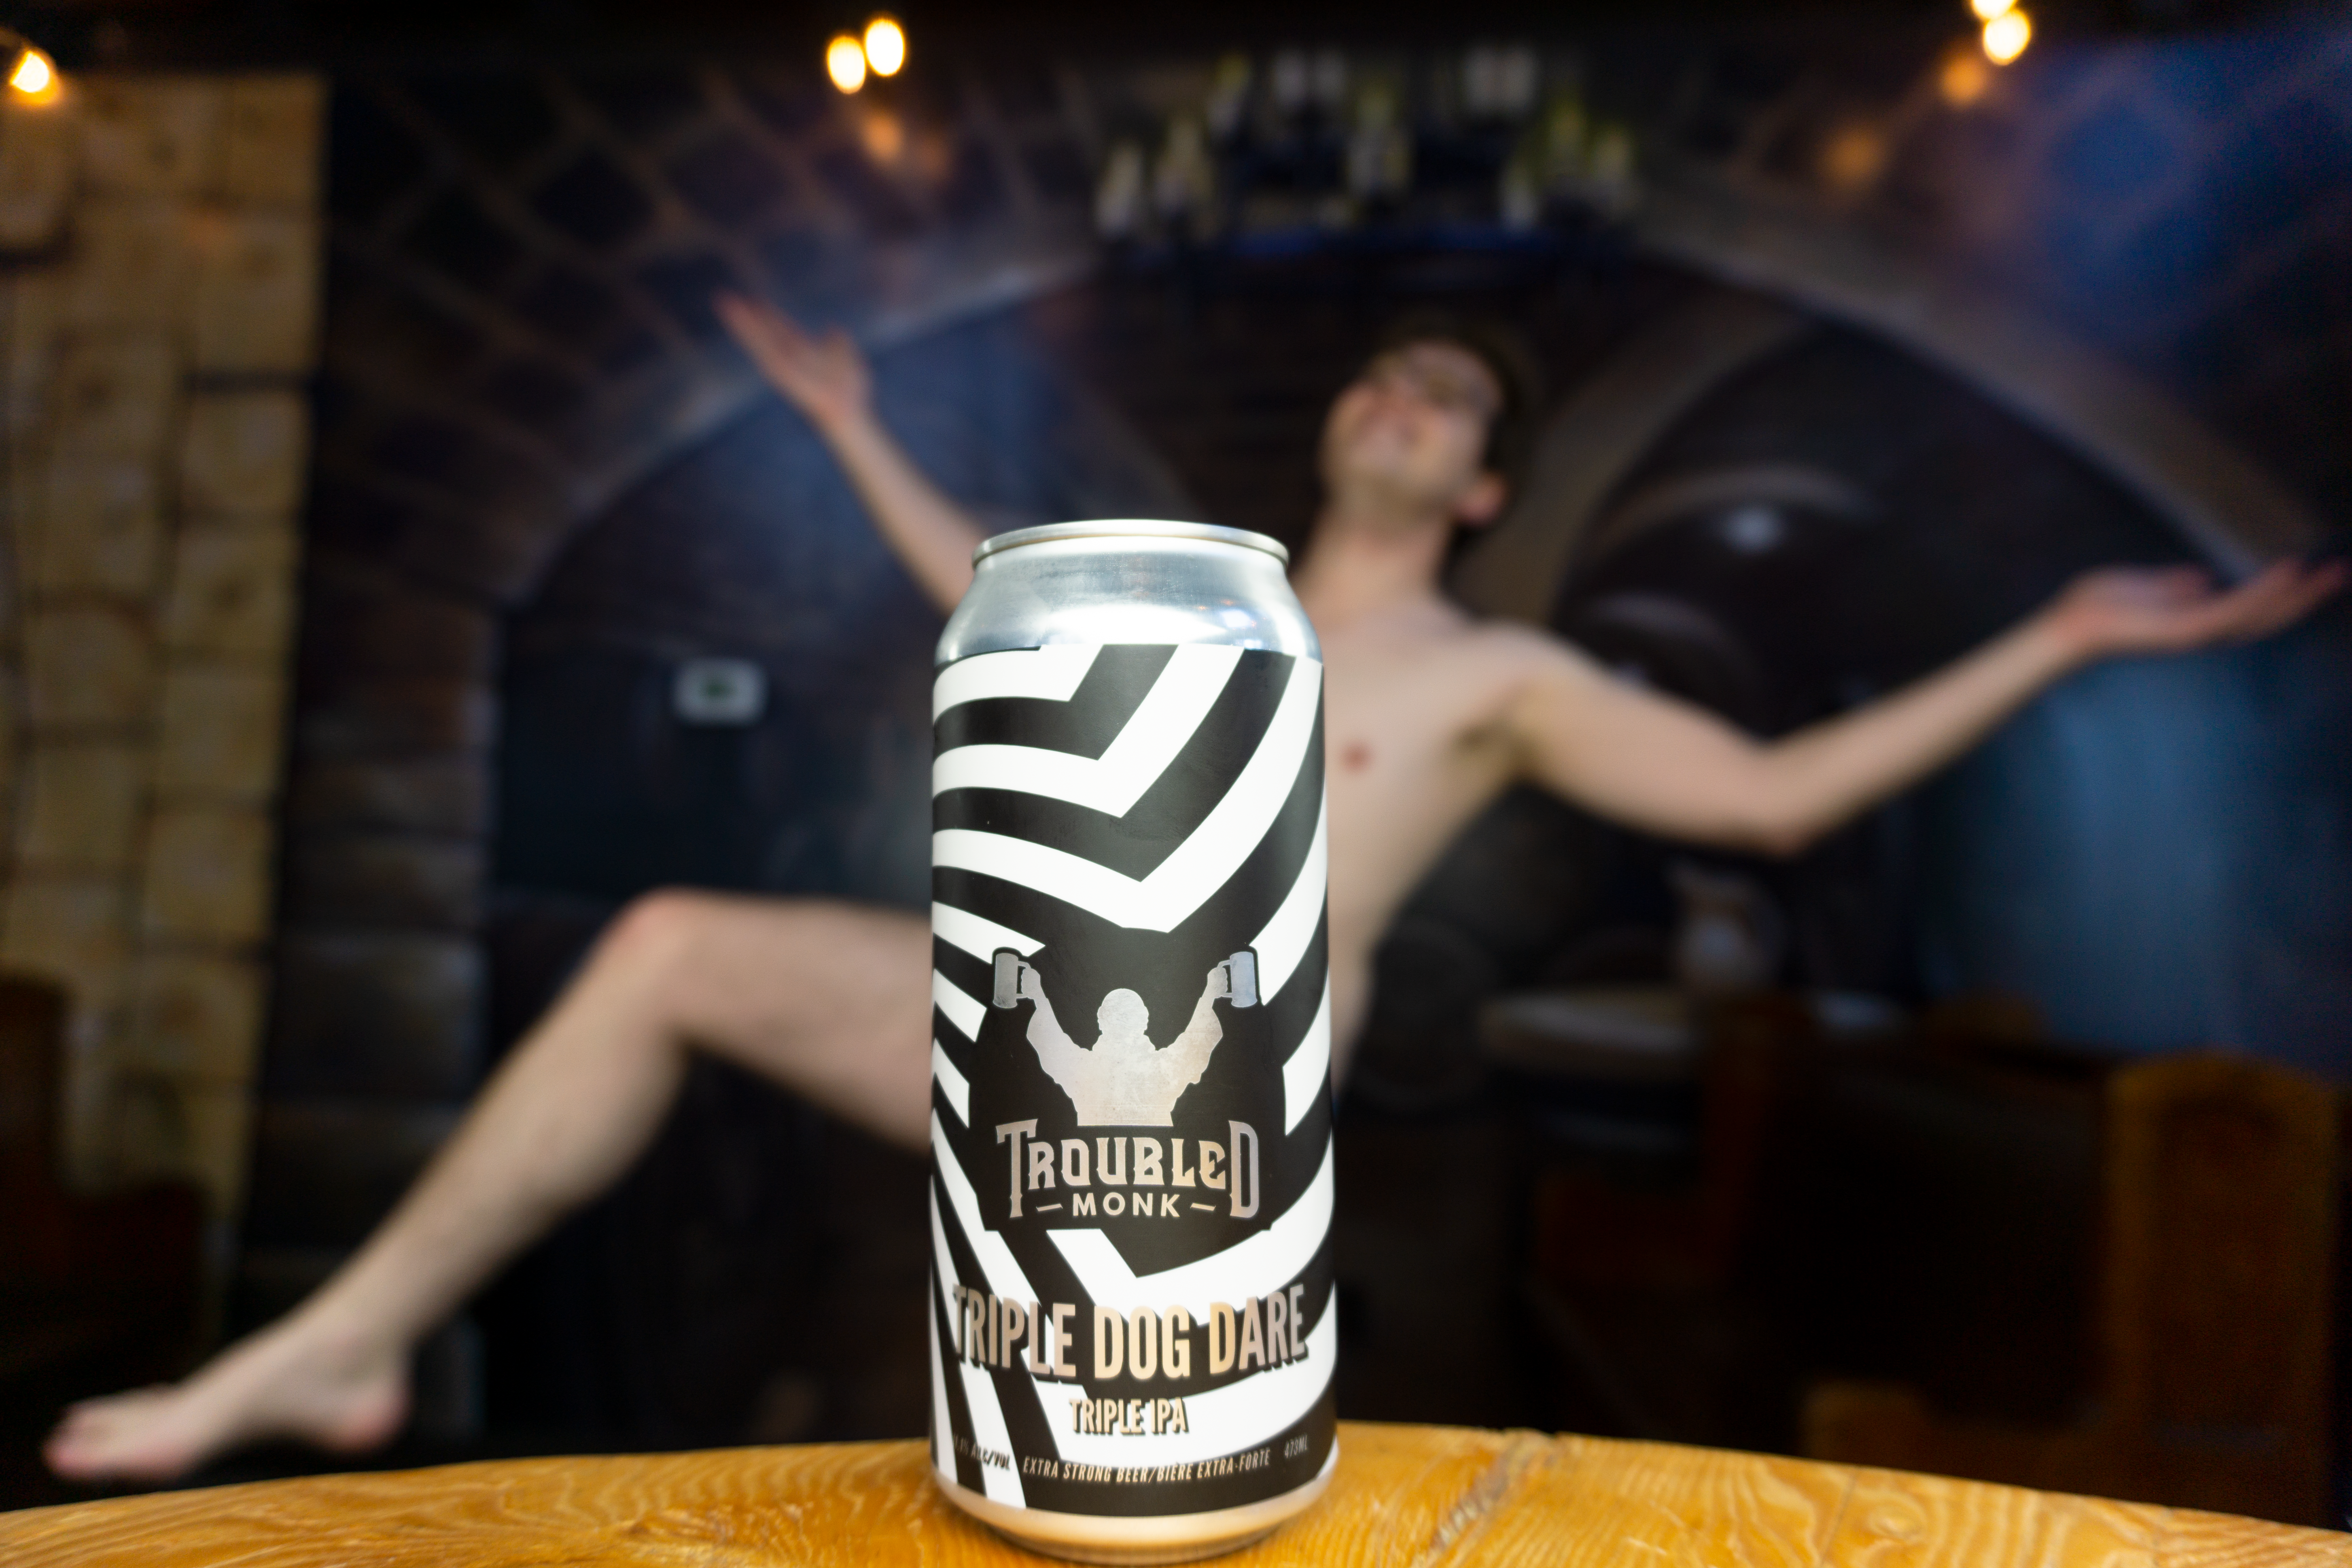 a picture of troubled monk's triple ipa with konner in the background blurred out, but seemingly naked, was he triple dog dared?